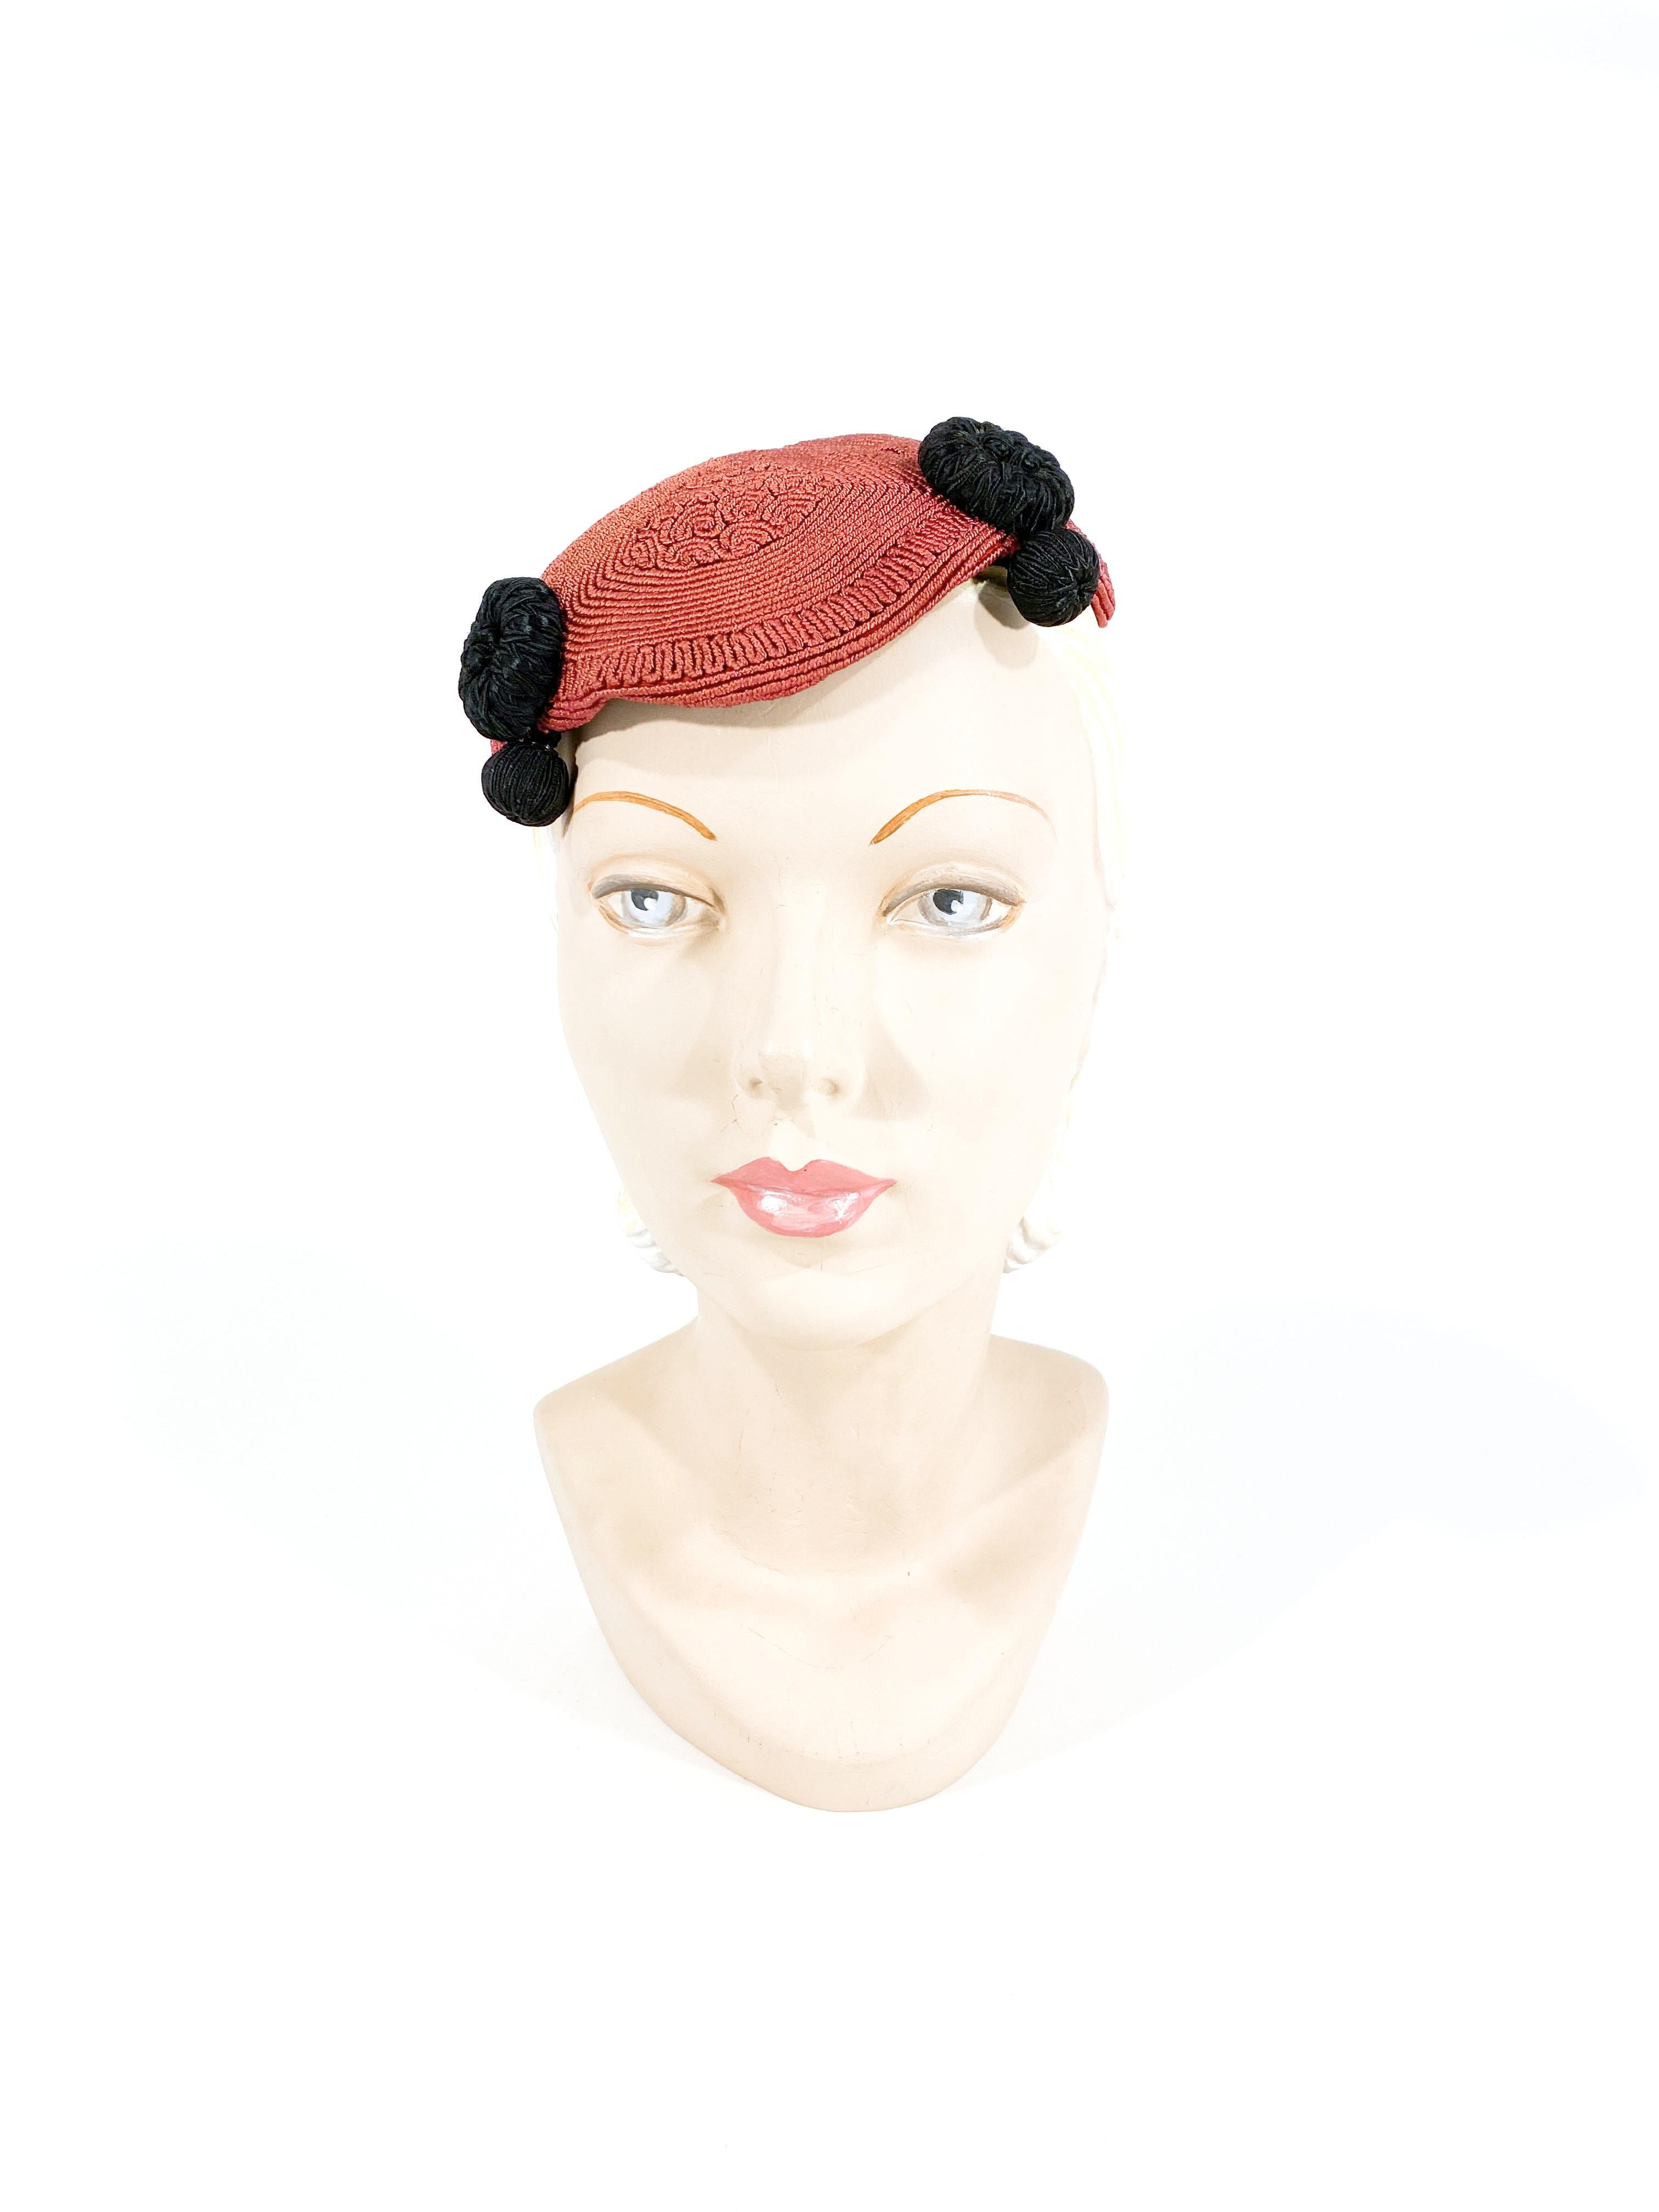 1930s Art Deco rust-colored intricate soutache skull cap with black buttons and tassels